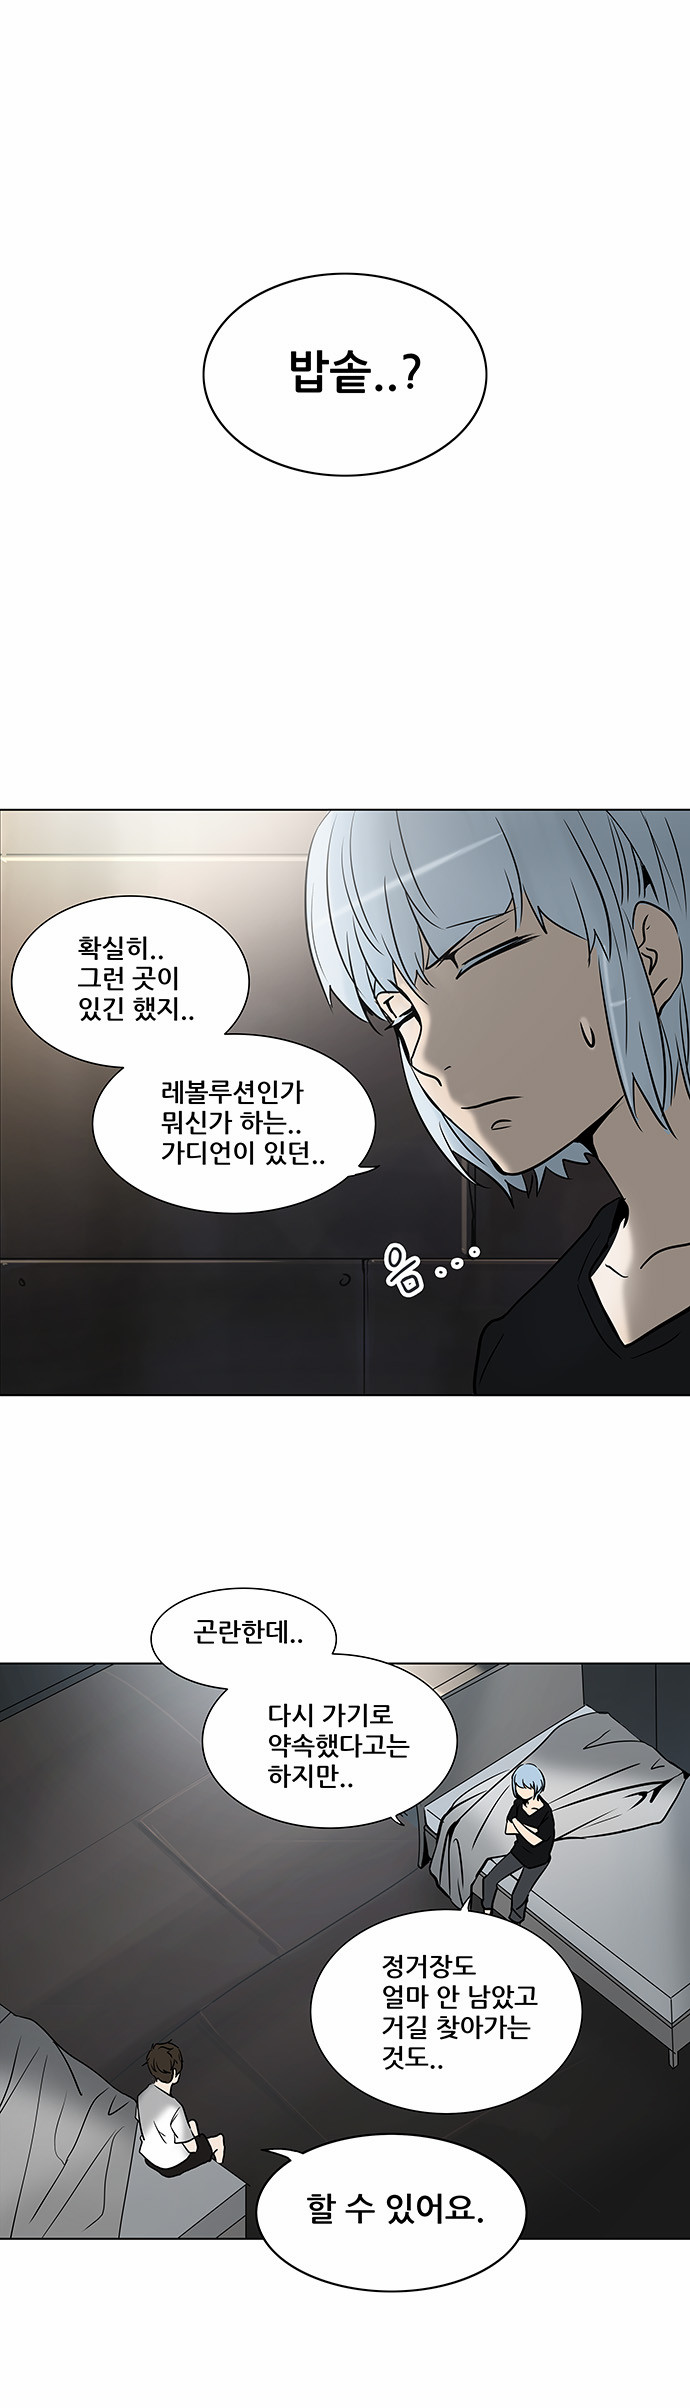 Tower of God - Chapter 281 - Page 1